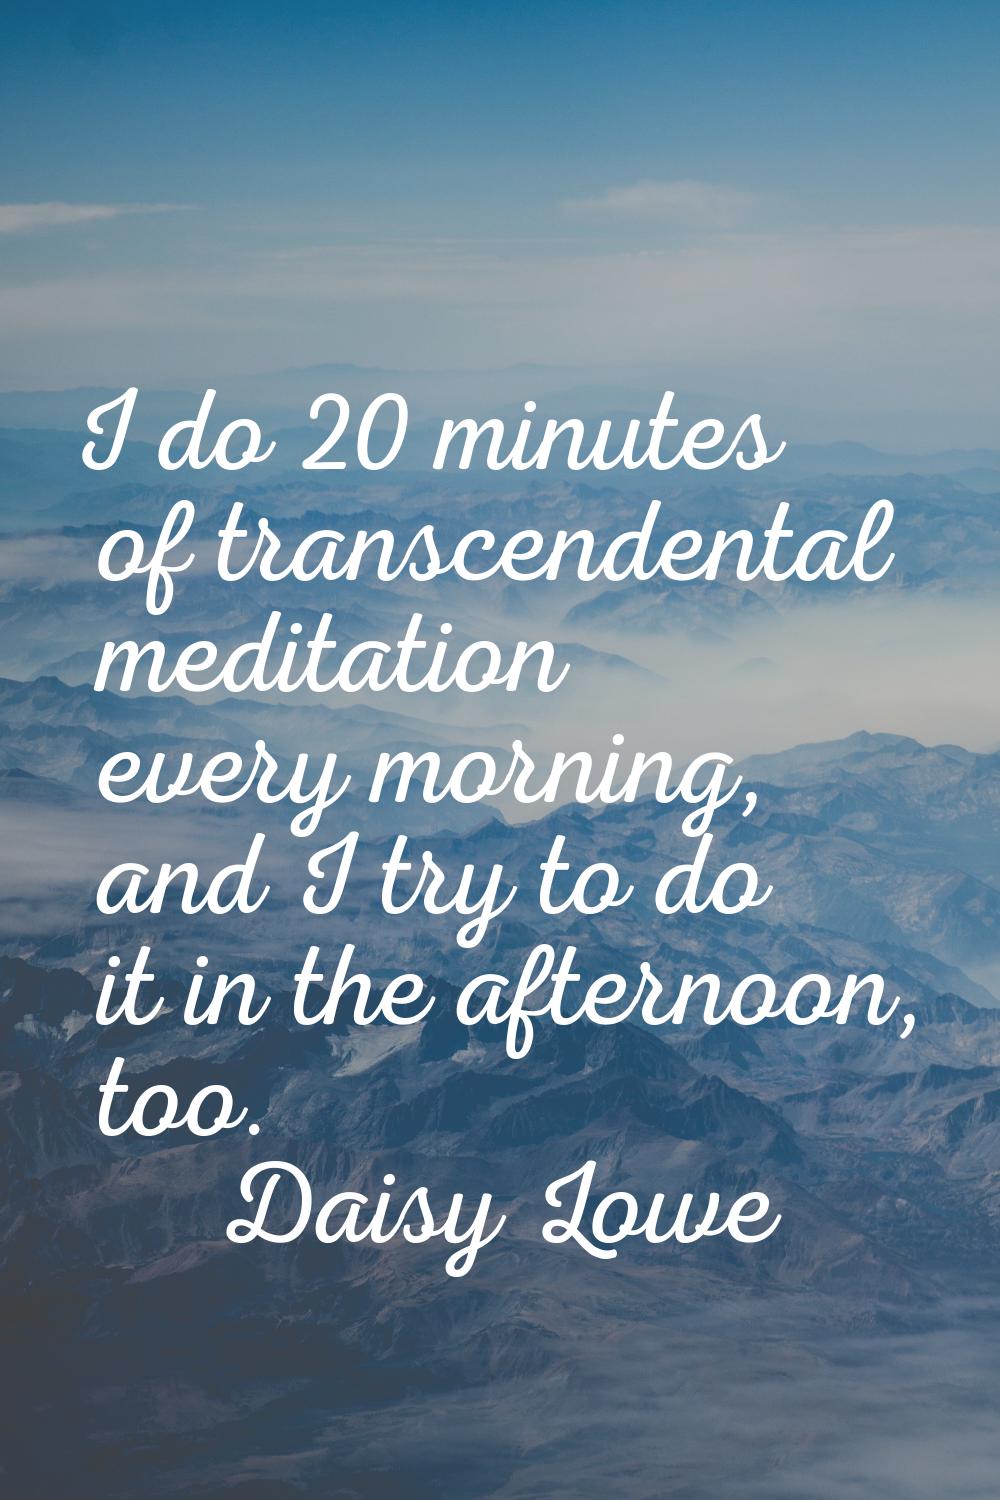 I do 20 minutes of transcendental meditation every morning, and I try to do it in the afternoon, to